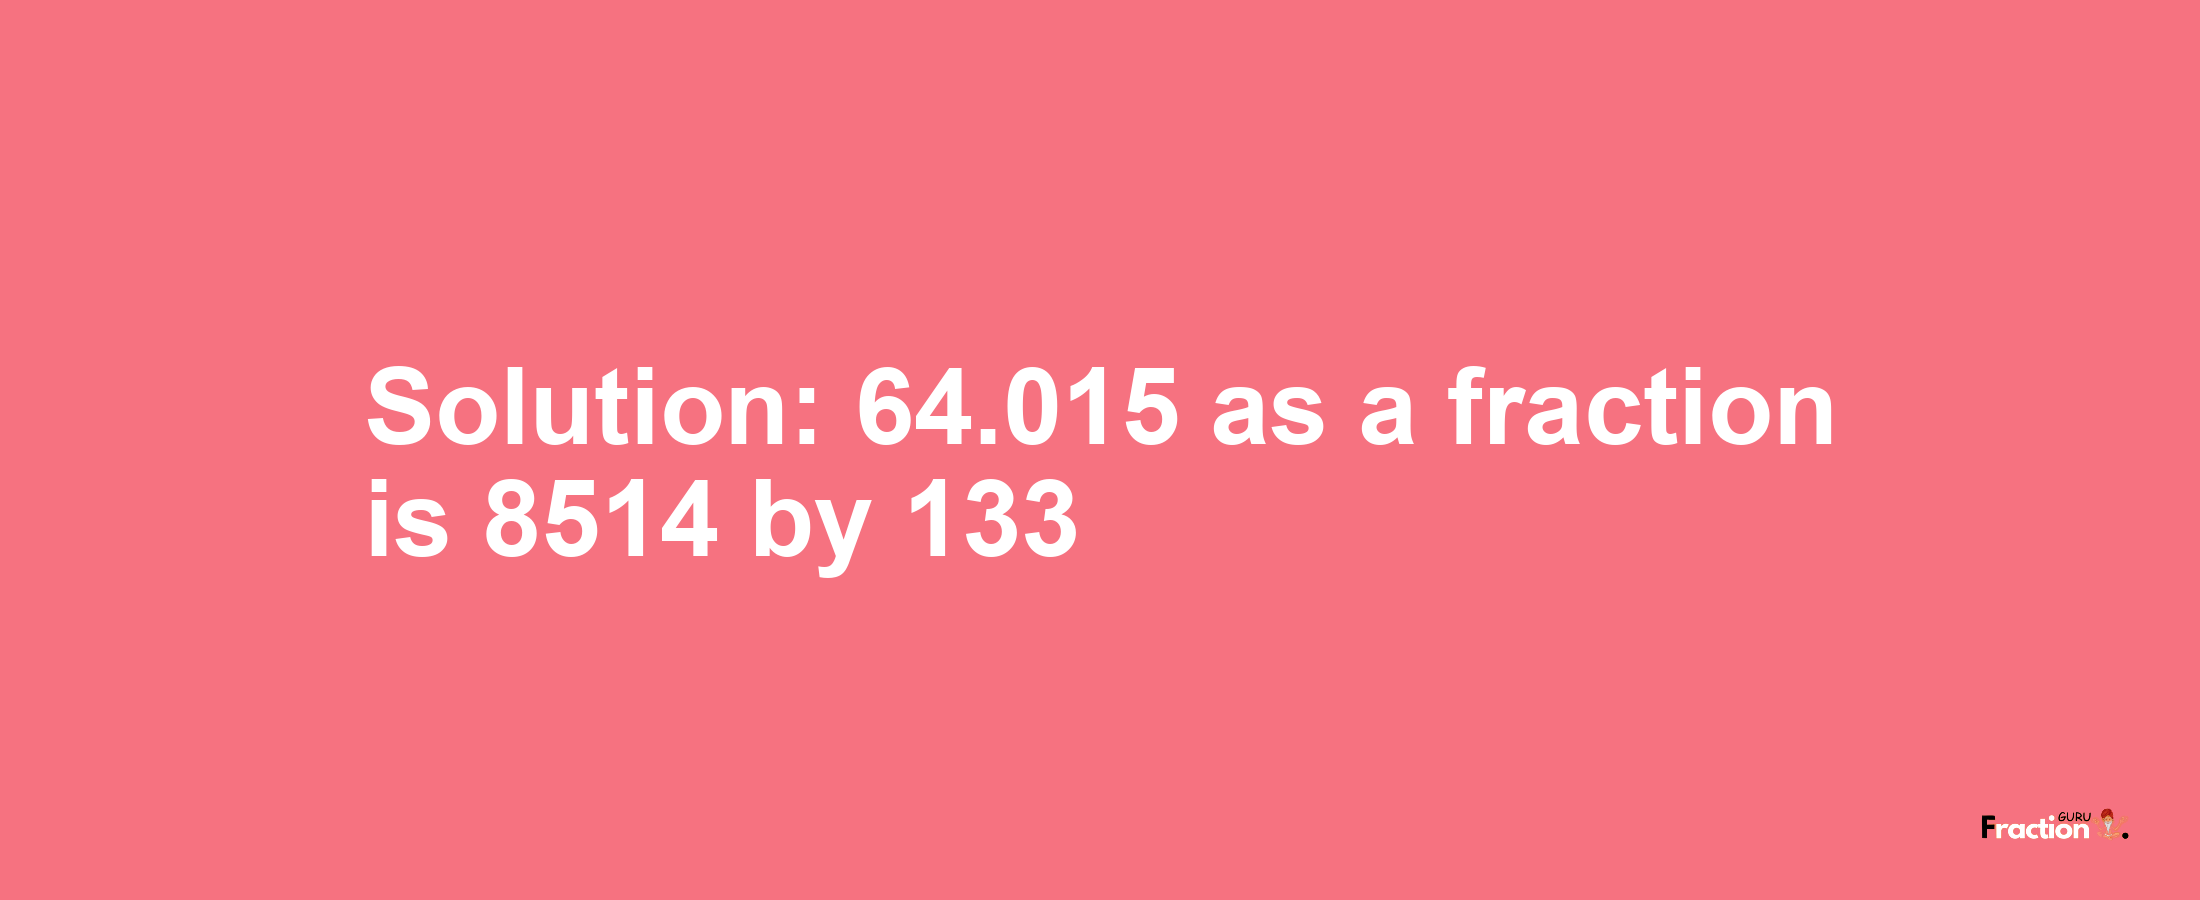 Solution:64.015 as a fraction is 8514/133